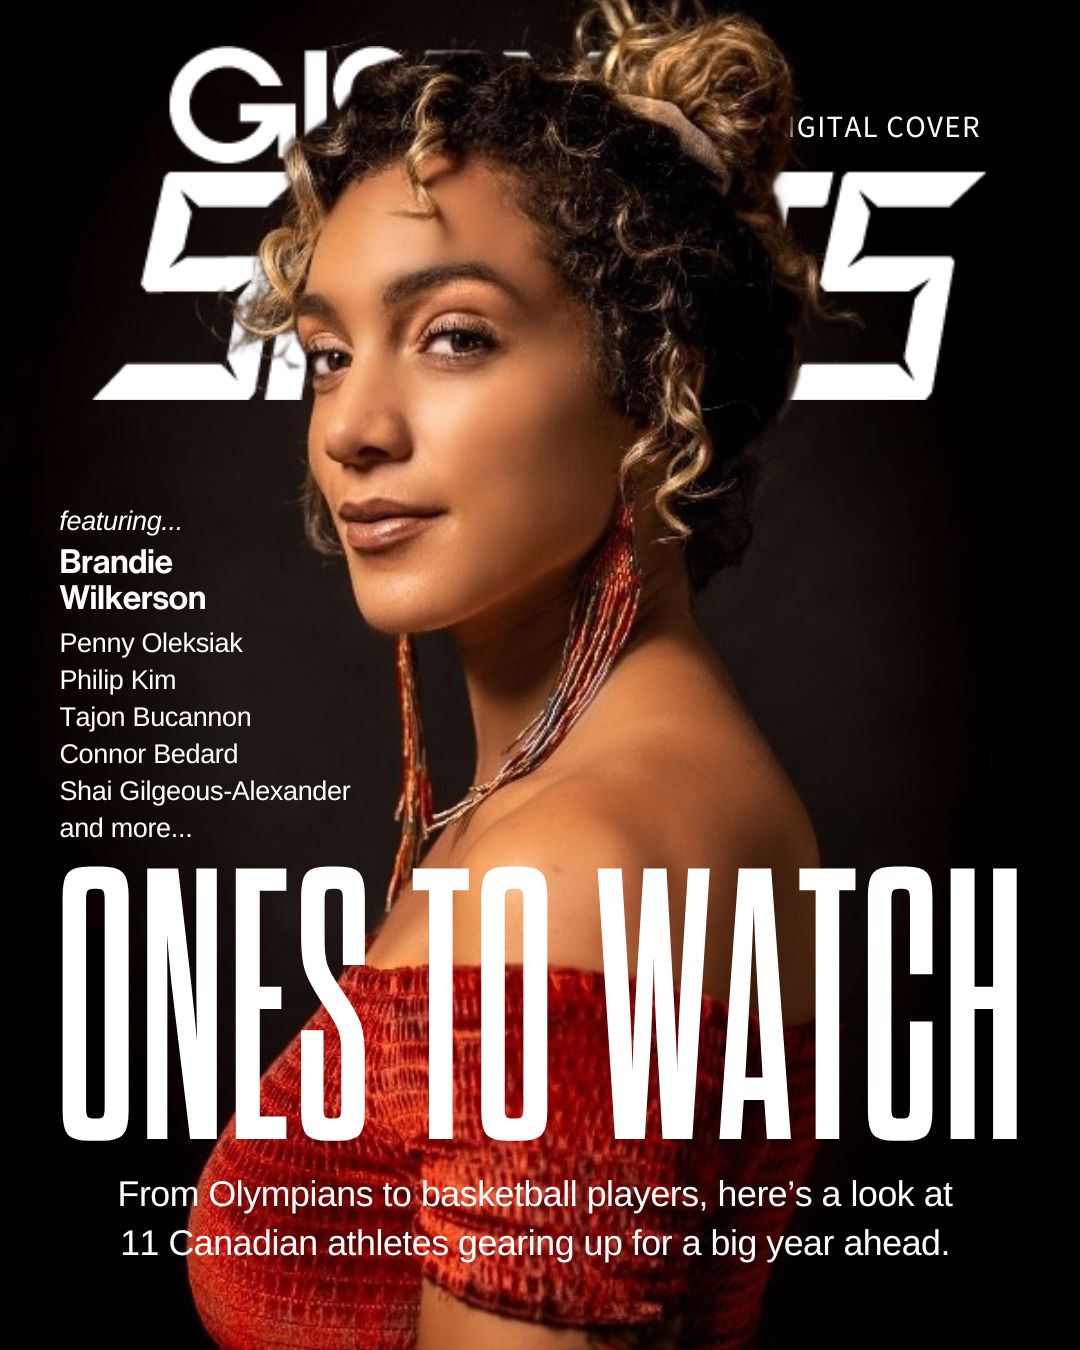 Magazine cover featuring Brandie Wilkerson. Her hair is done up in a loose bun and she is facing the camera from the side in a portrait shot, wearing a off-the-shoulder red dress. There is copy written overtop.